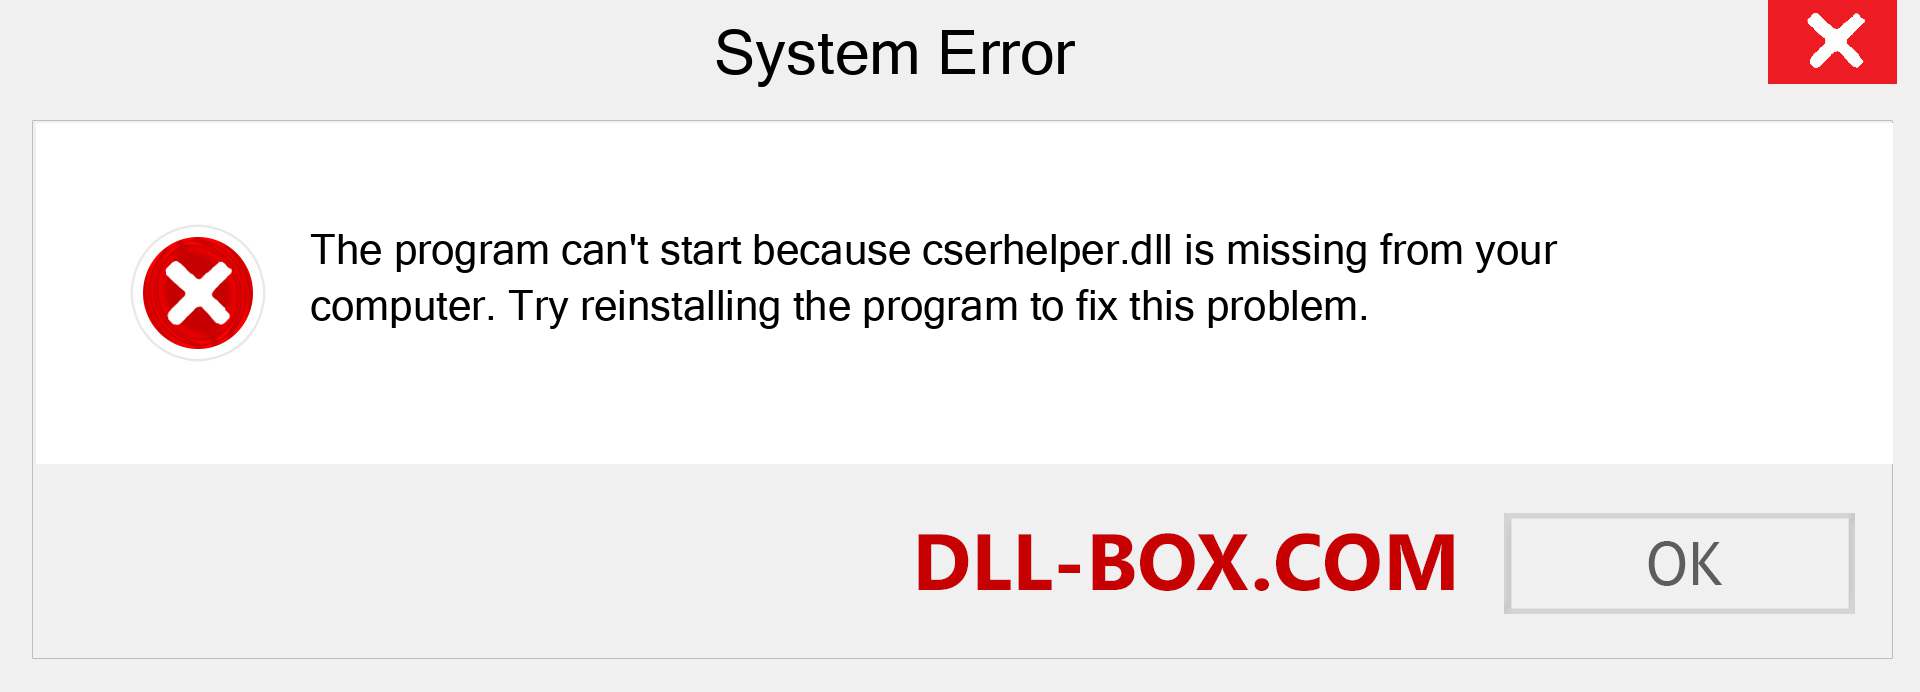  cserhelper.dll file is missing?. Download for Windows 7, 8, 10 - Fix  cserhelper dll Missing Error on Windows, photos, images